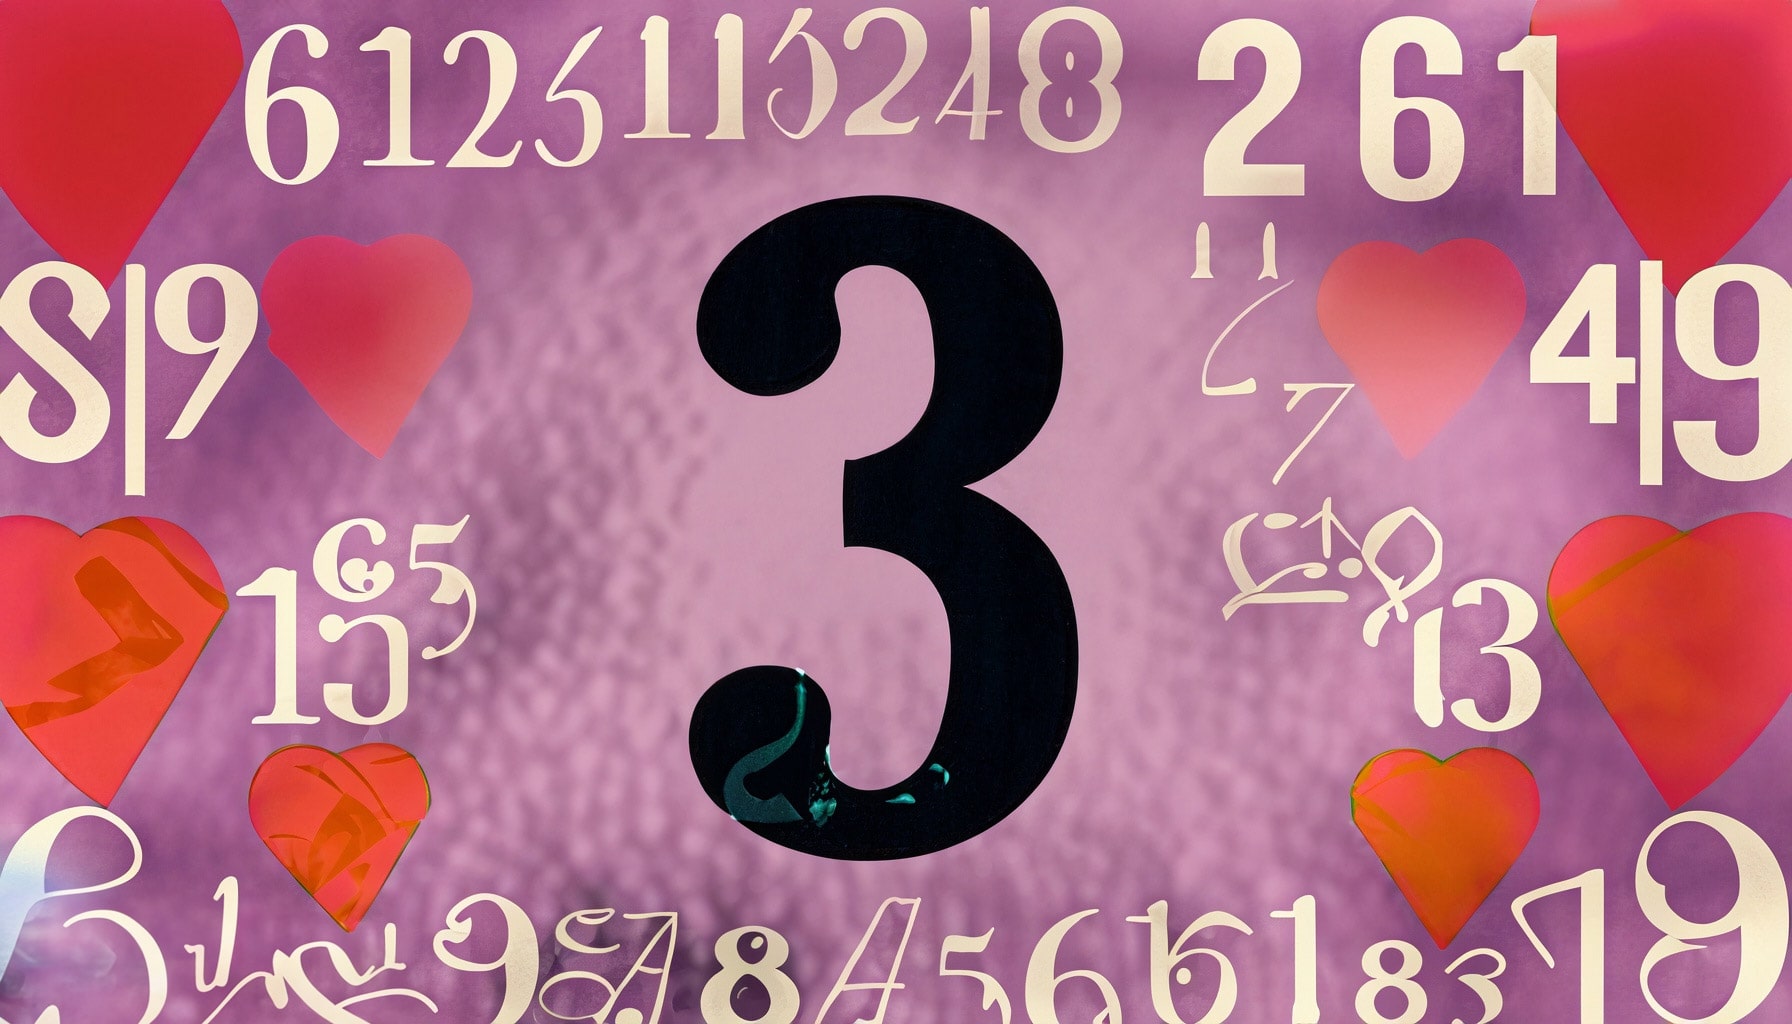 Numerology - the meaning of number 3 - Astrolovely.com